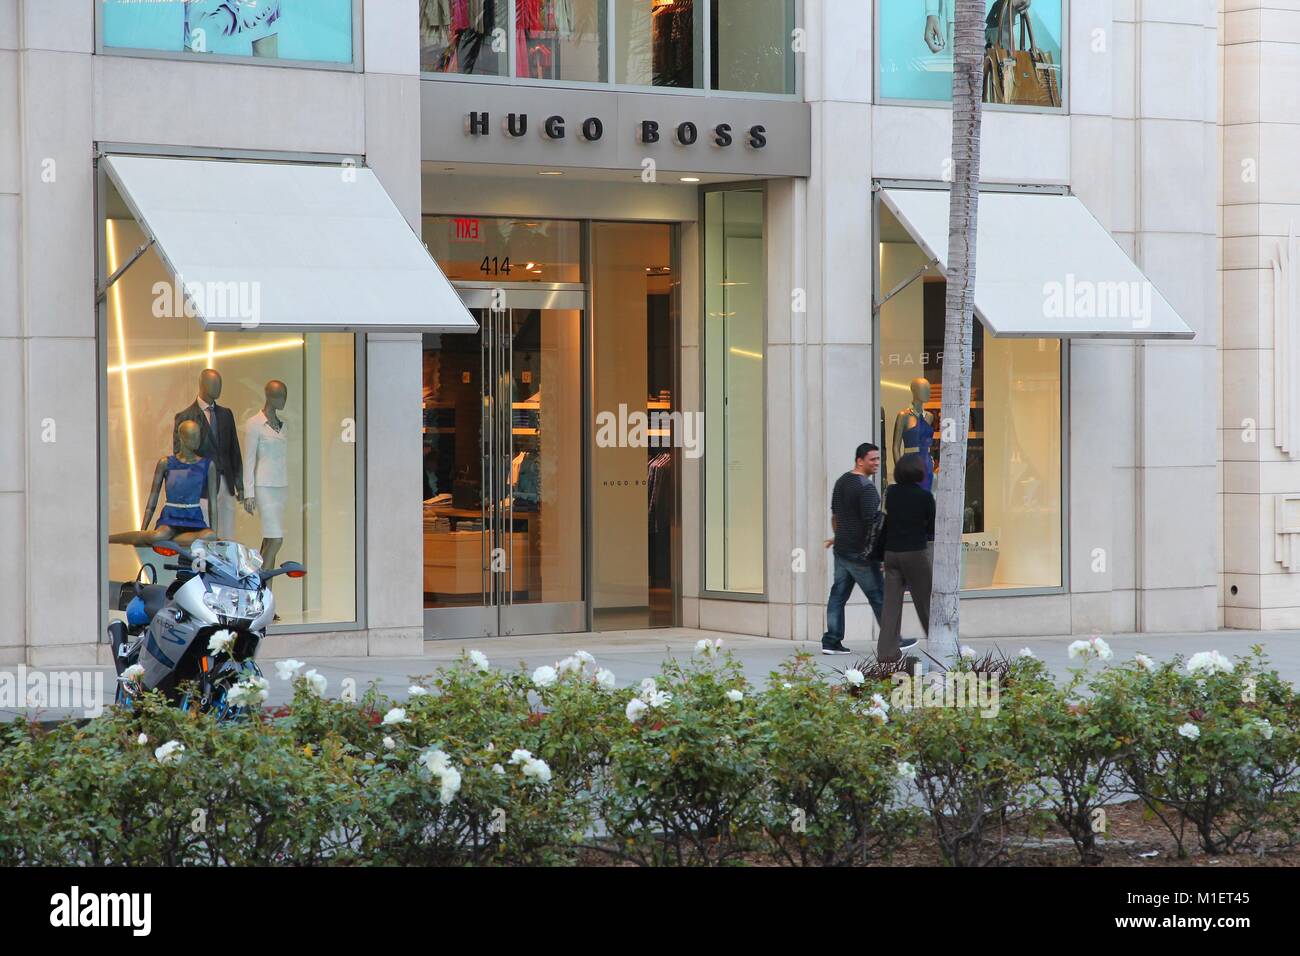 LOS ANGELES, USA - APRIL 5, 2014: Shoppers visit Hugo Boss store in Beverly Hills, Los Angeles. Hugo Boss is a German luxury fashion house 263 million Stock Photo